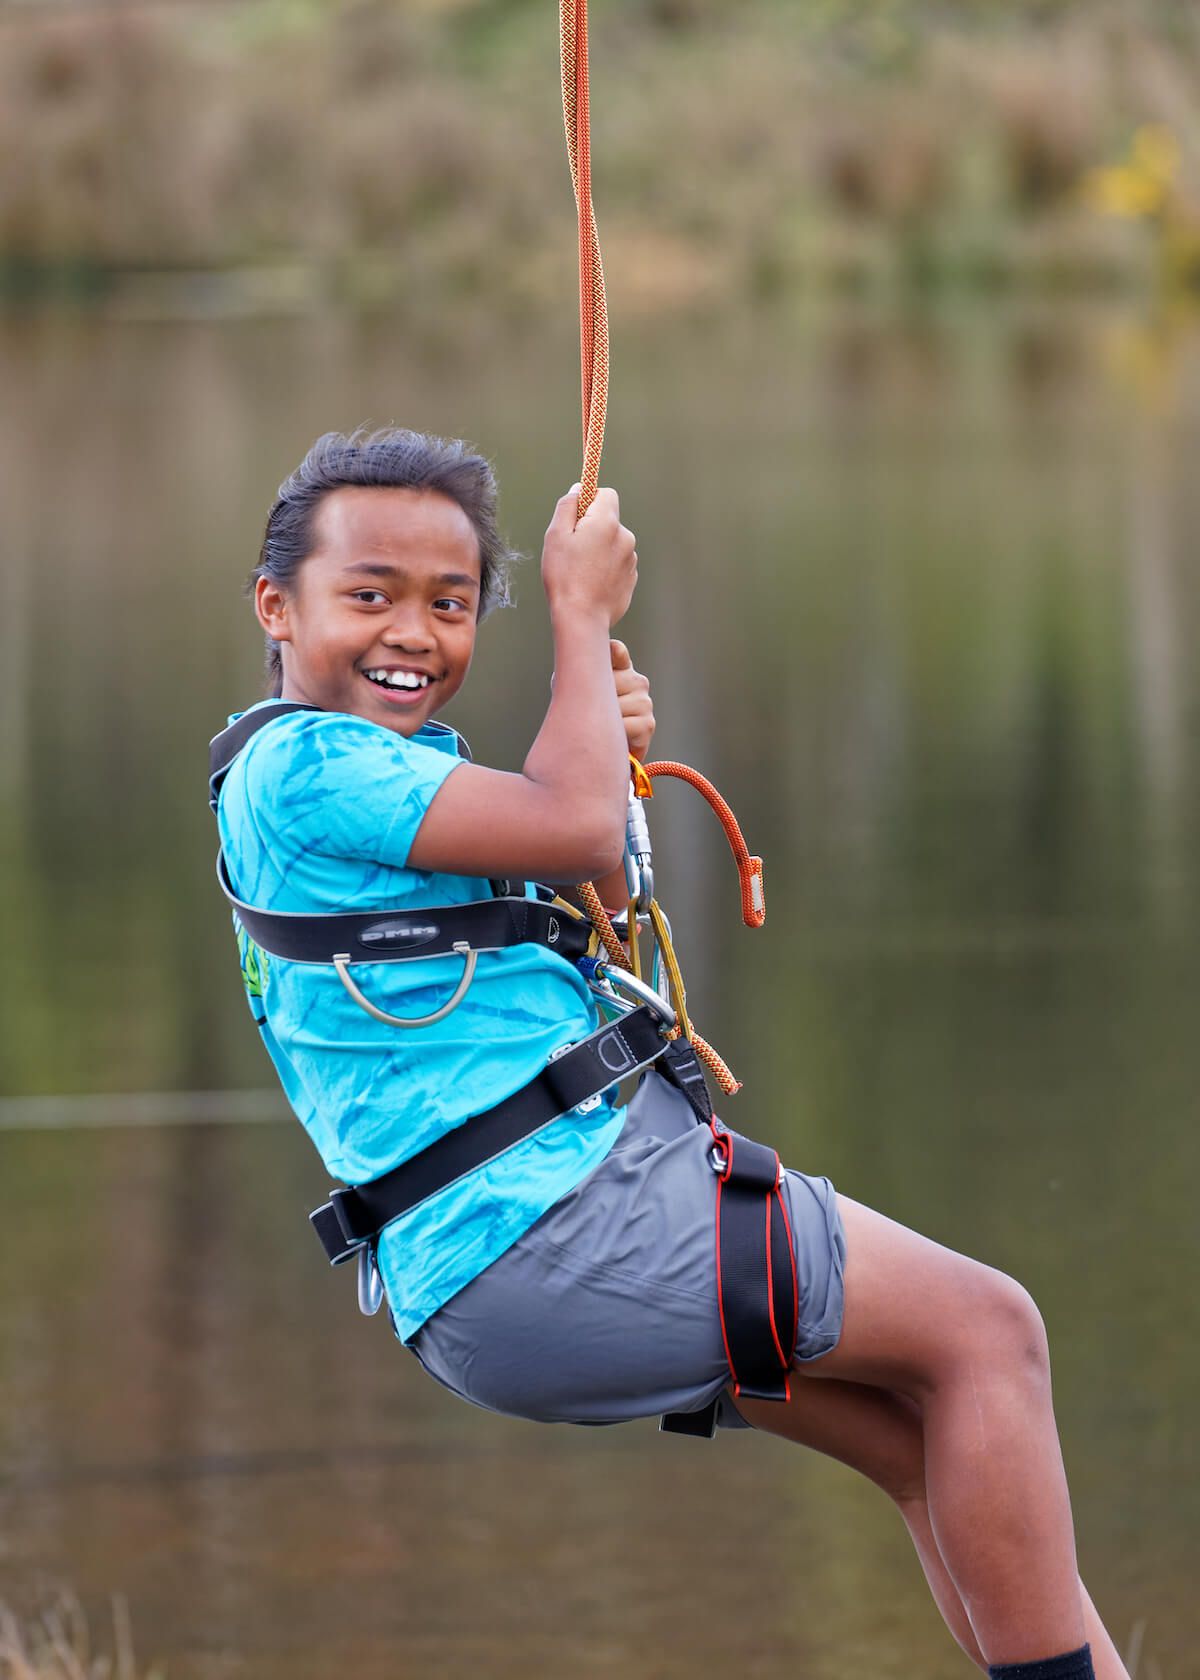 School holiday camps Victoria 2023: PGL Holiday Camps for kids 8-14 years (1-1.5 hours from Melbourne).